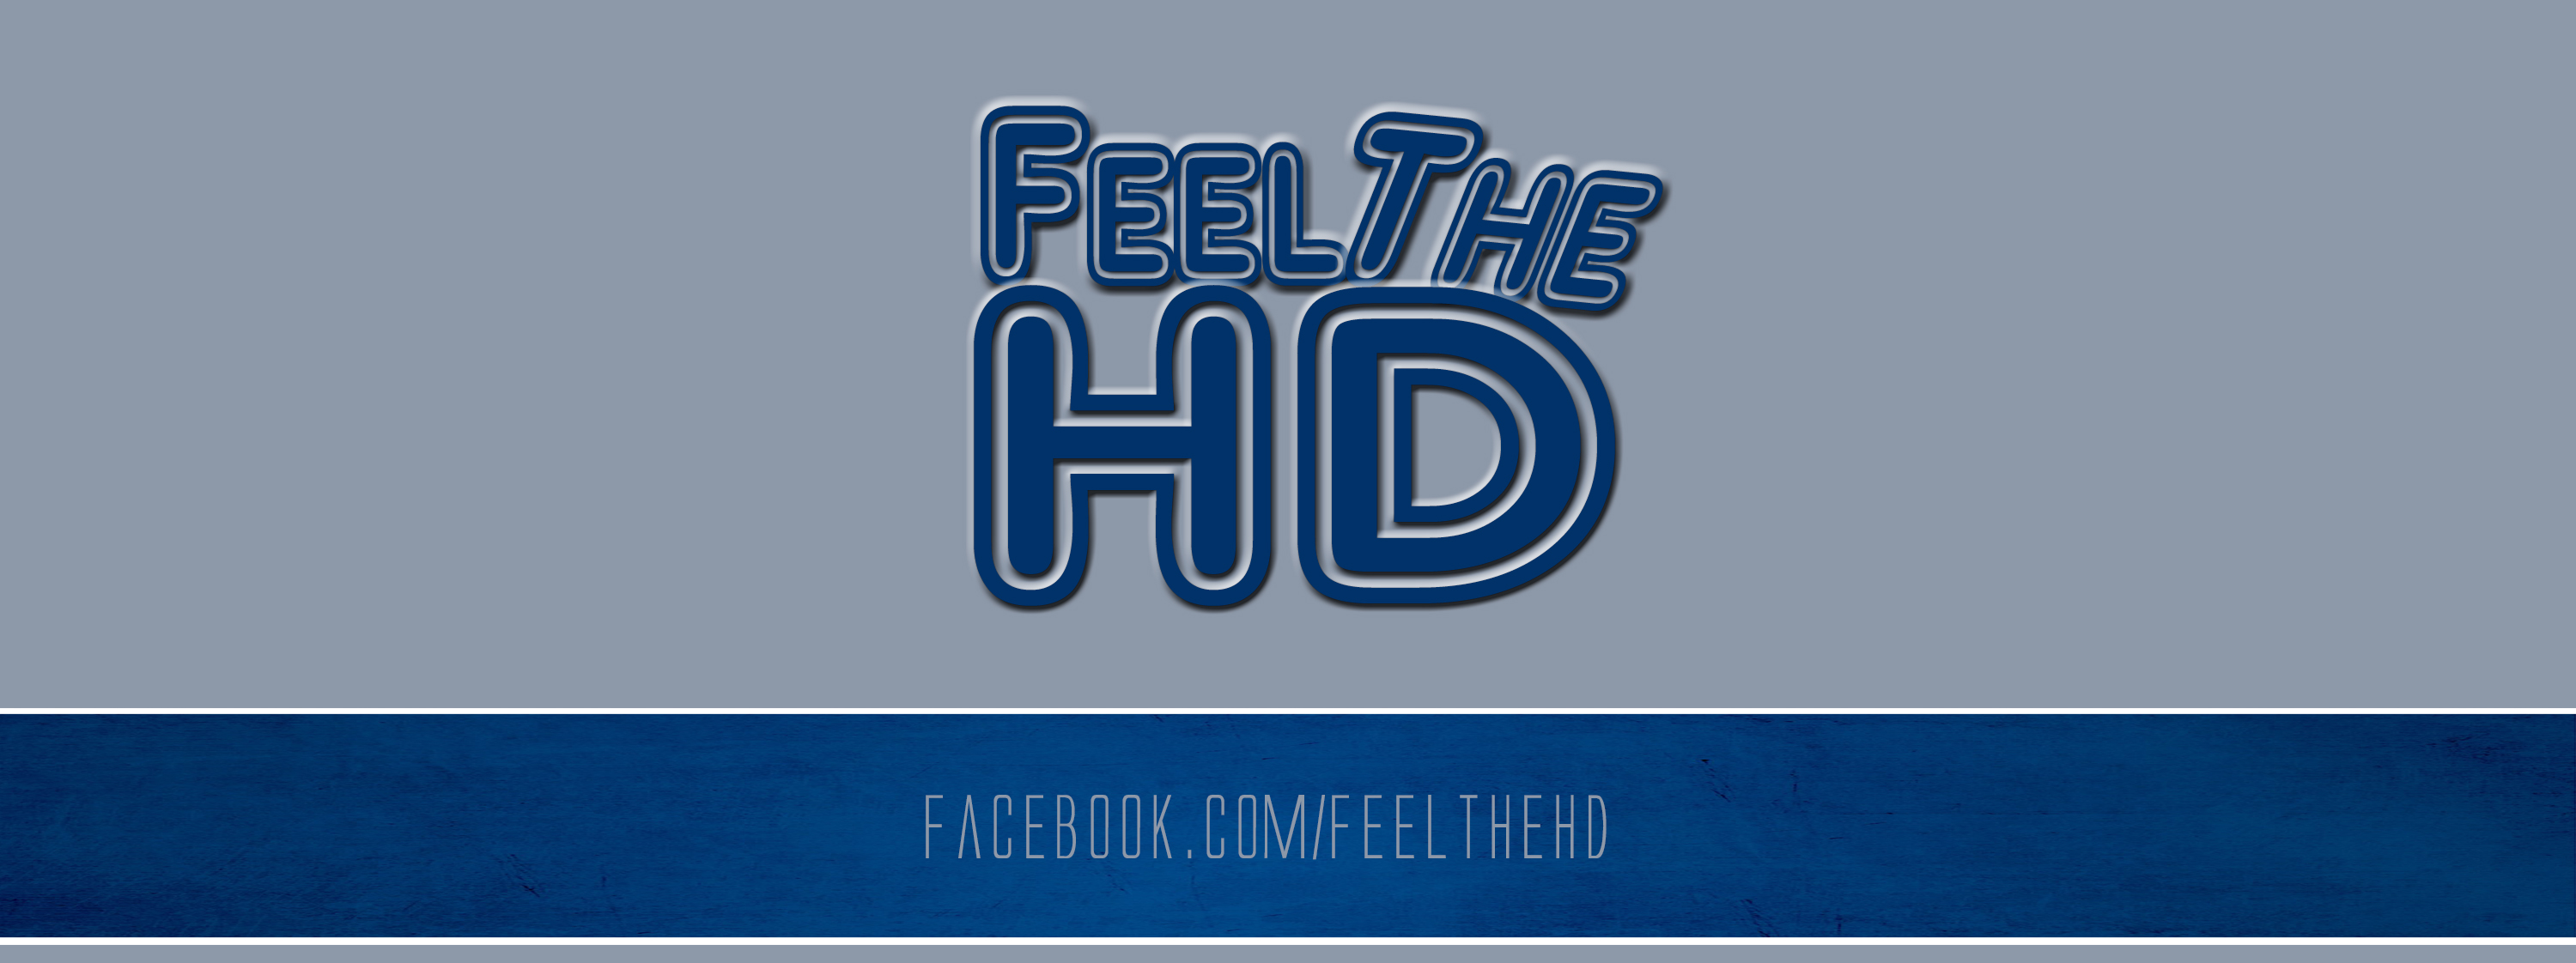 feel, The, Hd, Facebook, Pag Wallpaper